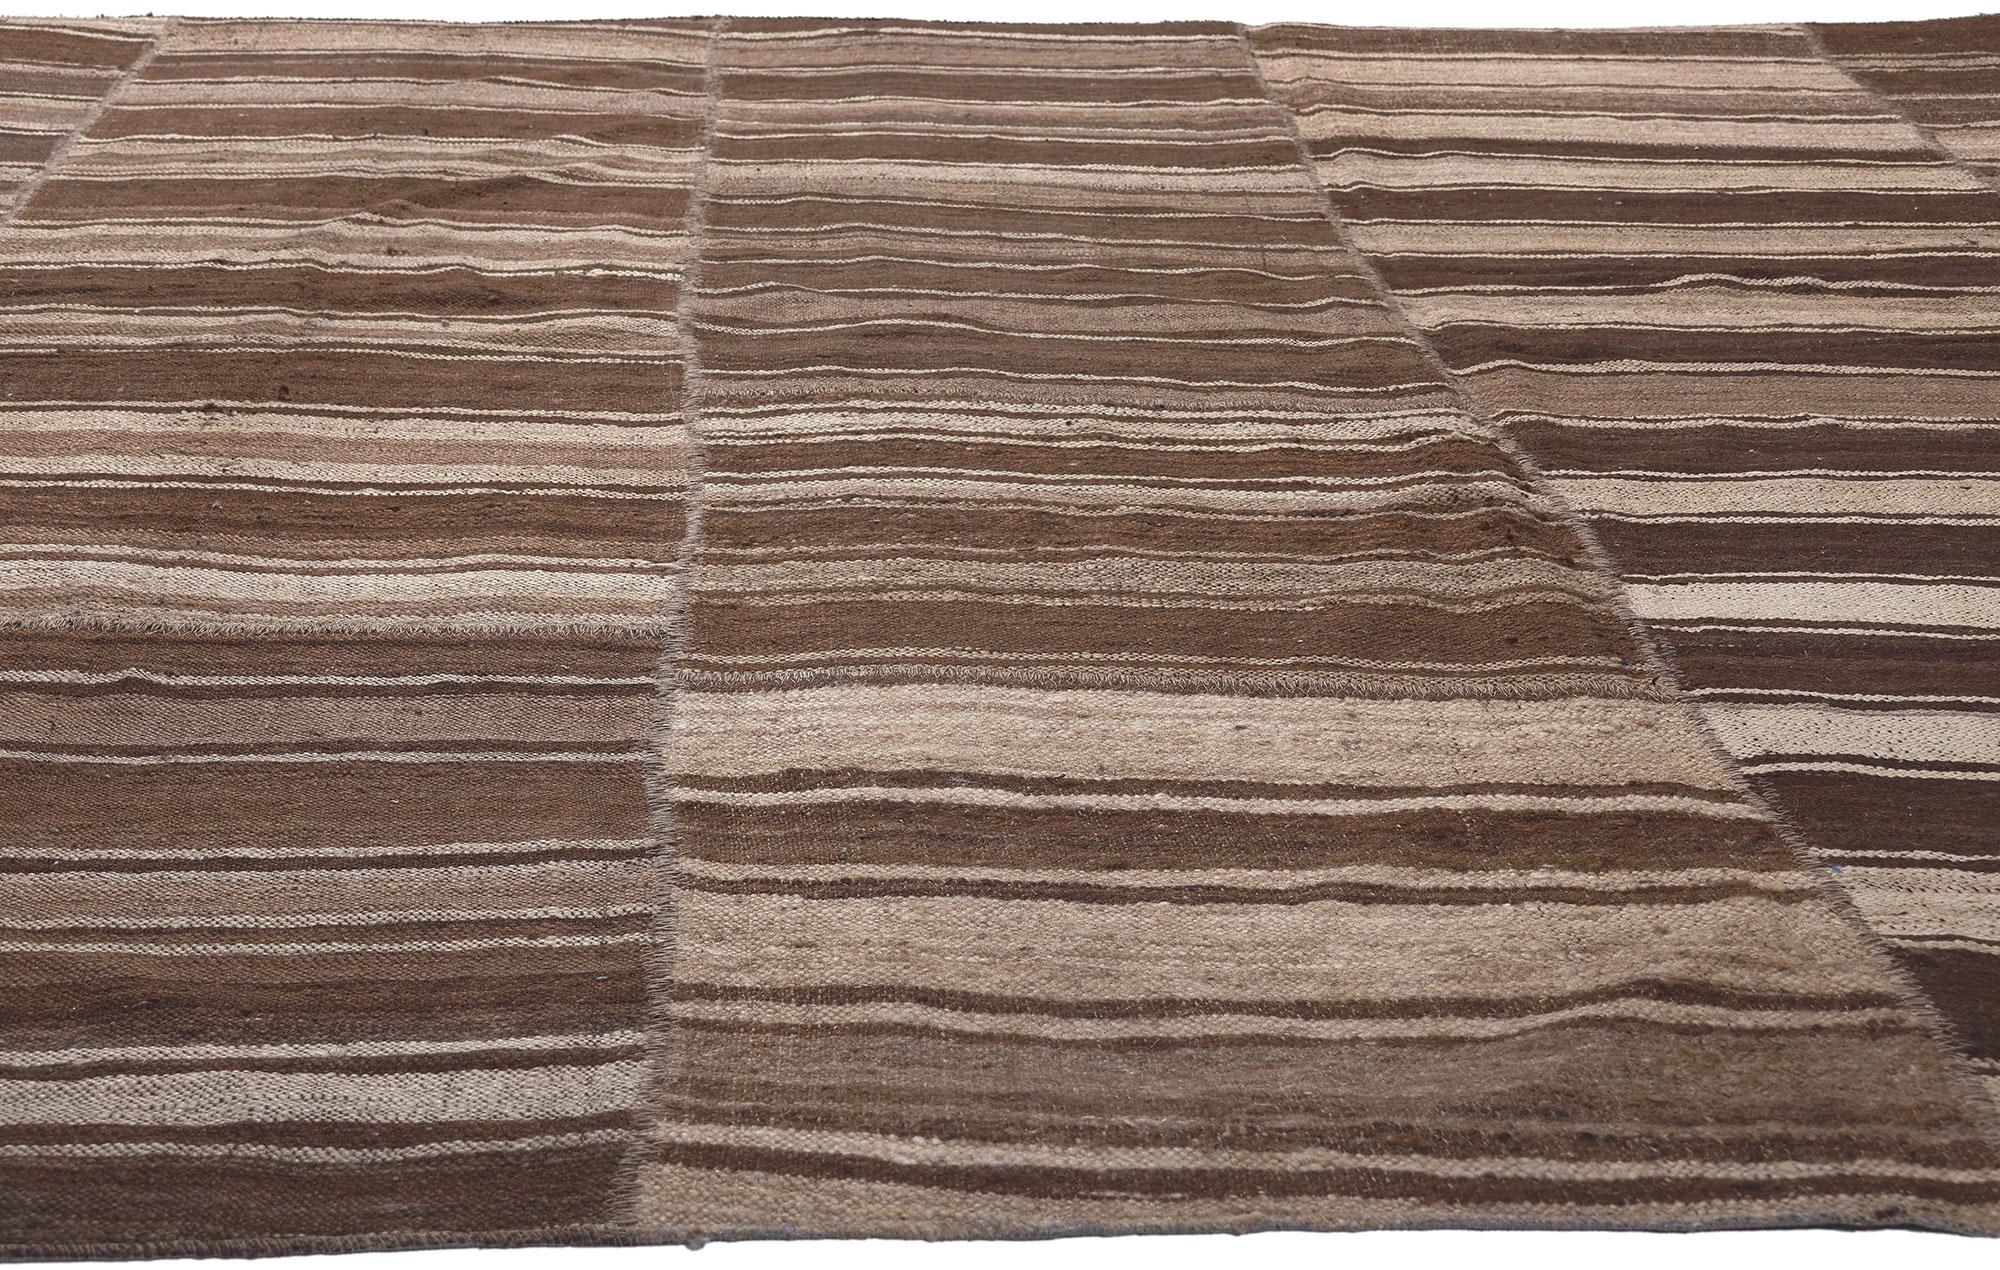 Earth-Tone Vintage Turkish Kilim Rug, Wabi-Sabi Embraces Rustic Finesse In Good Condition For Sale In Dallas, TX